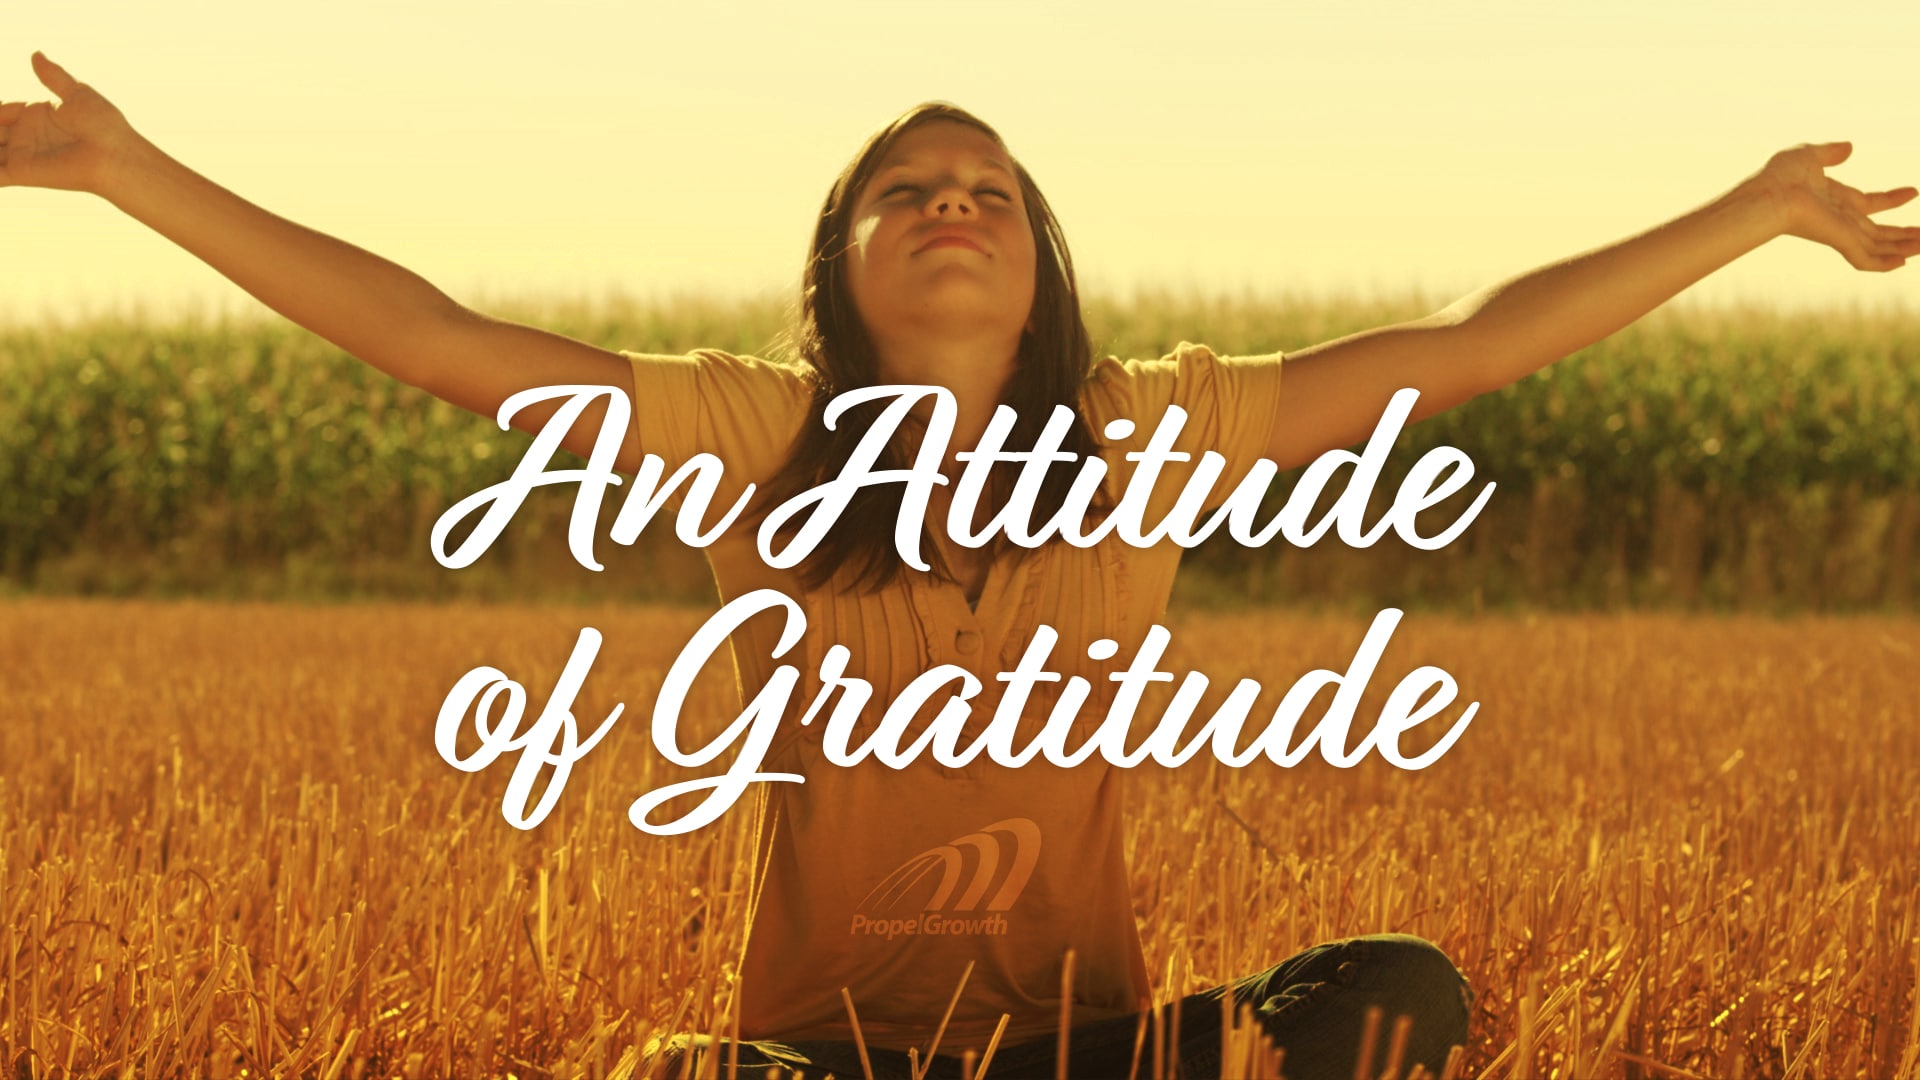 WHAT IS GRATITUDE AND WHY IS IT SO IMPORTANT?